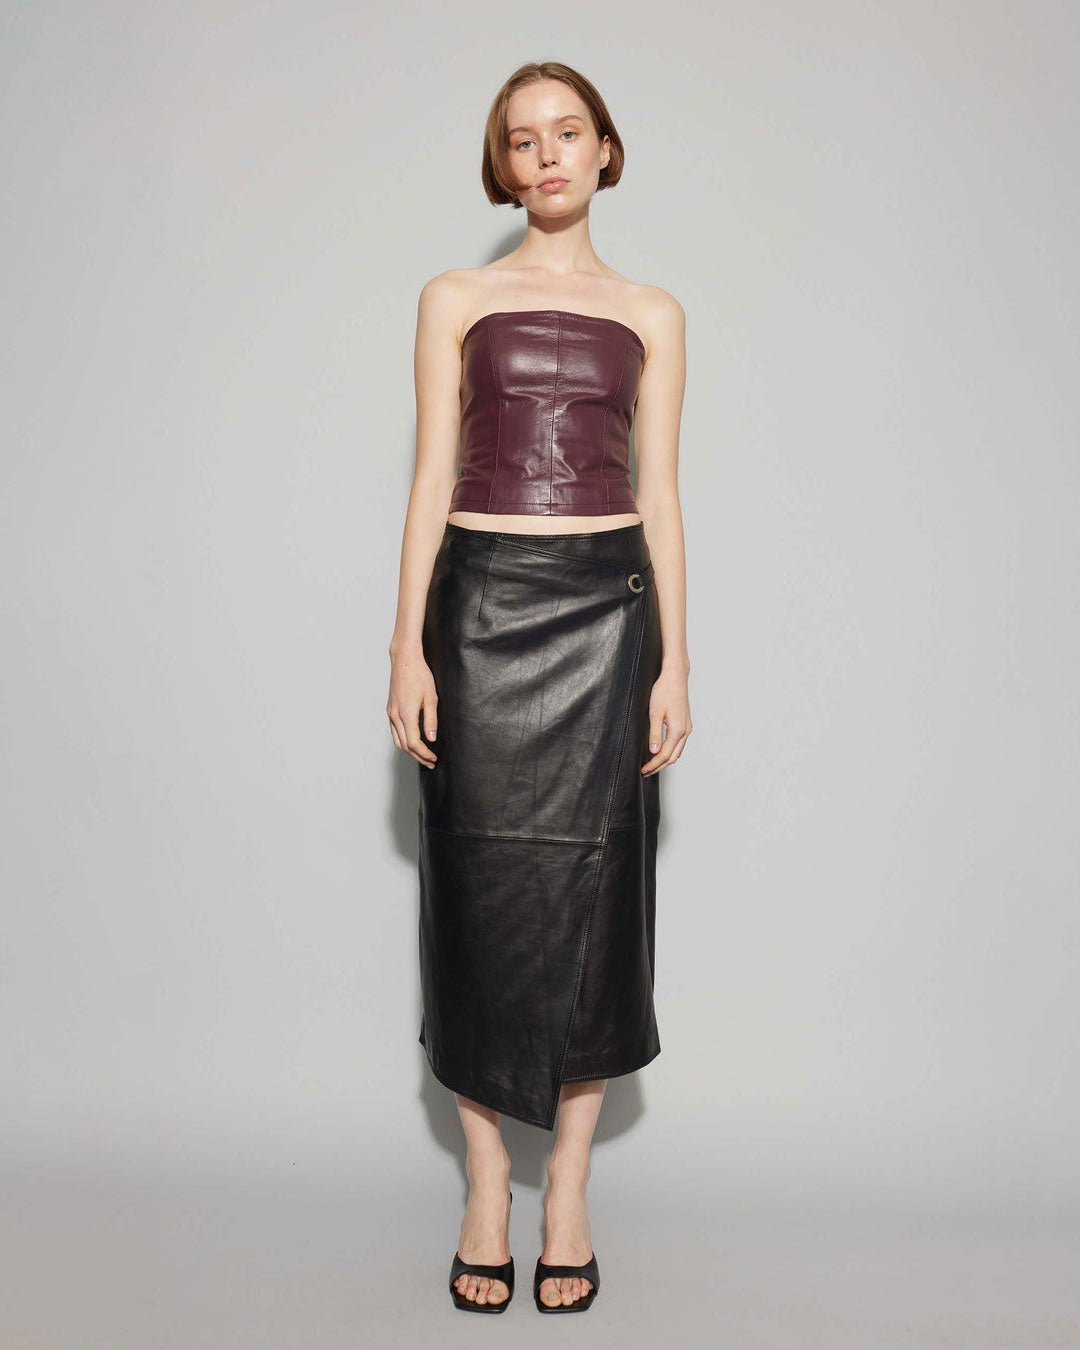 OVAL SQUARE Reflection Leather Skirt in Black